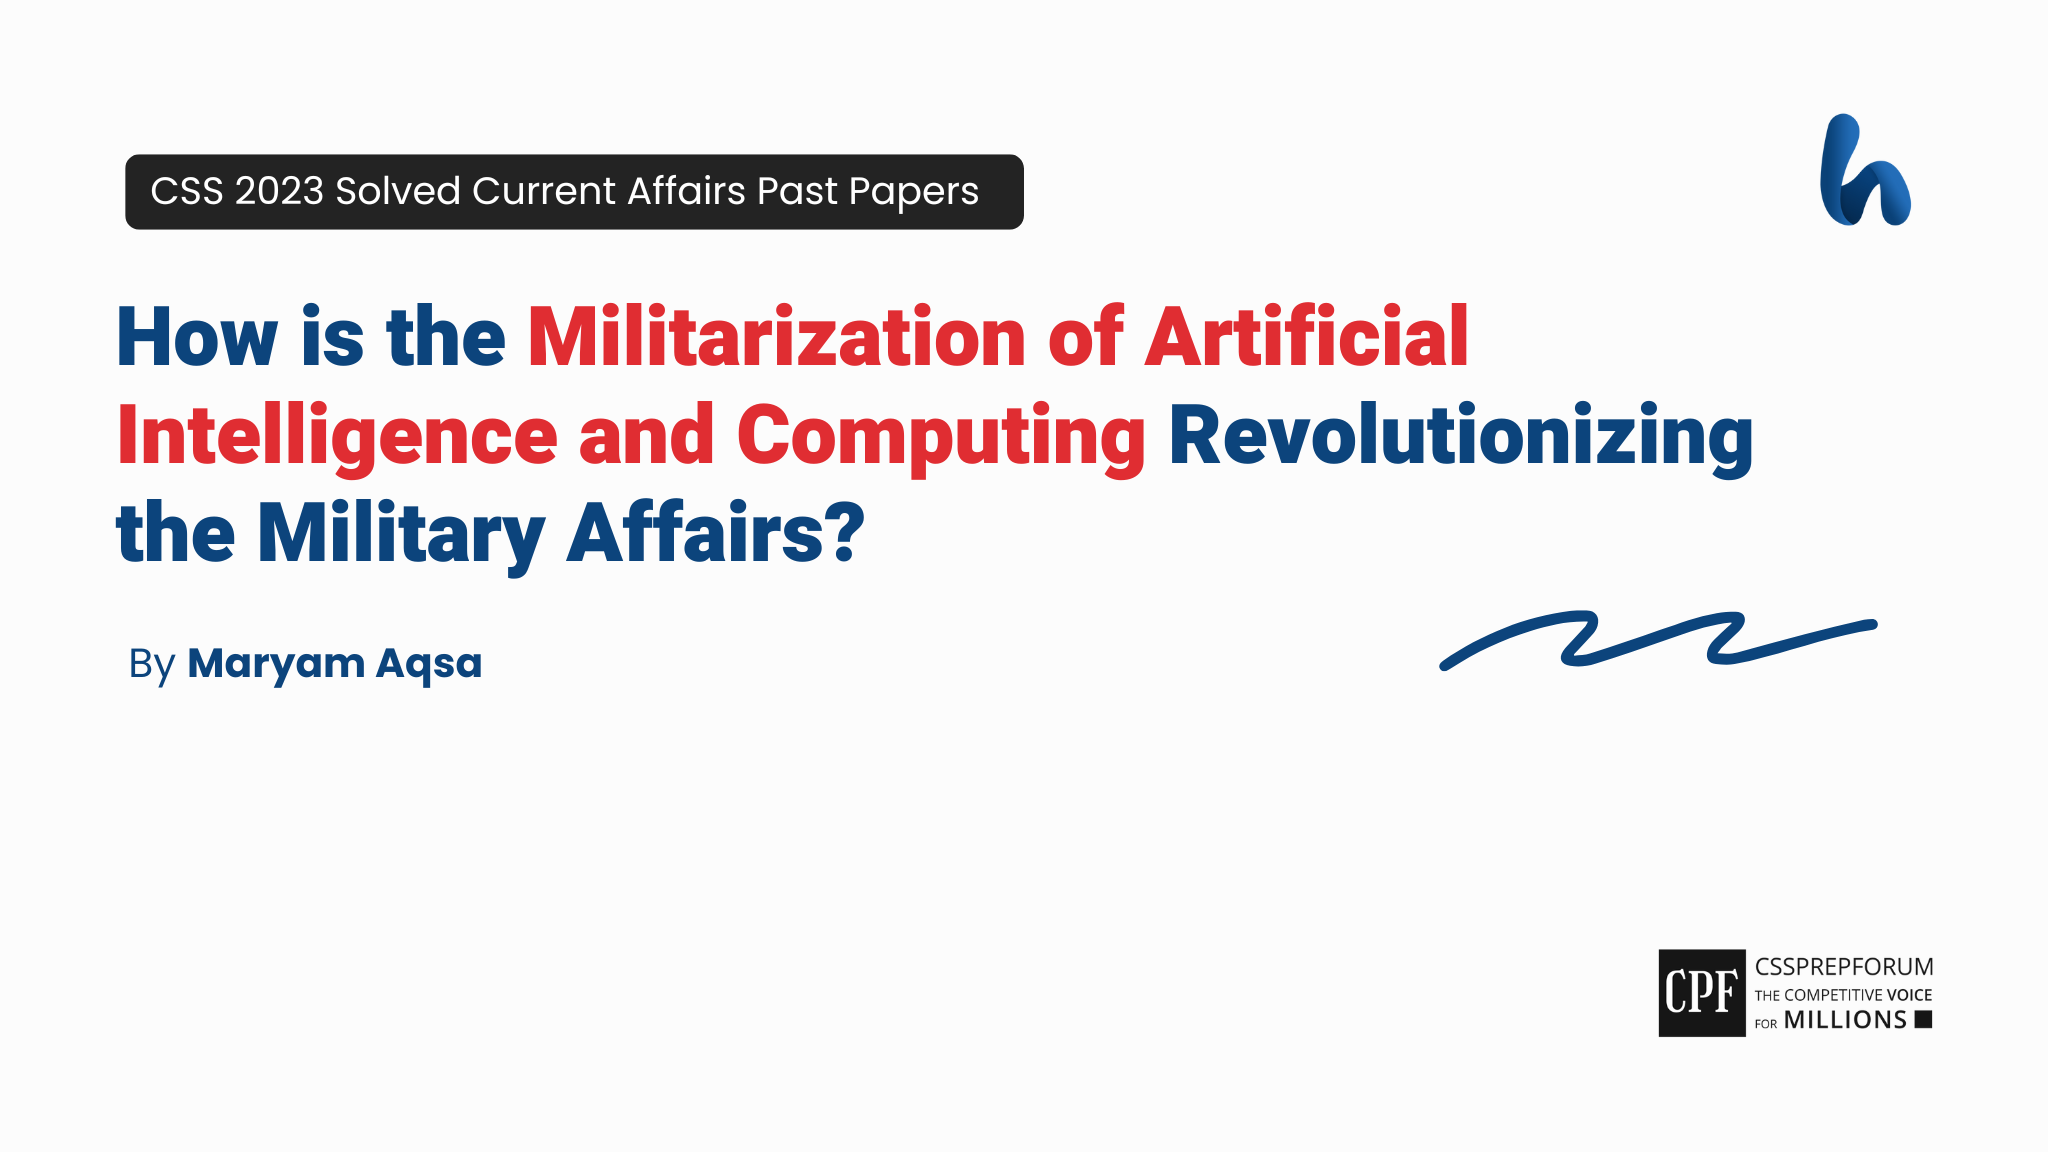 CSS Current Affairs 2021 question, 'Role of Militarization of AI in Revolutionizing Military' is solved by Maryam Aqsa...